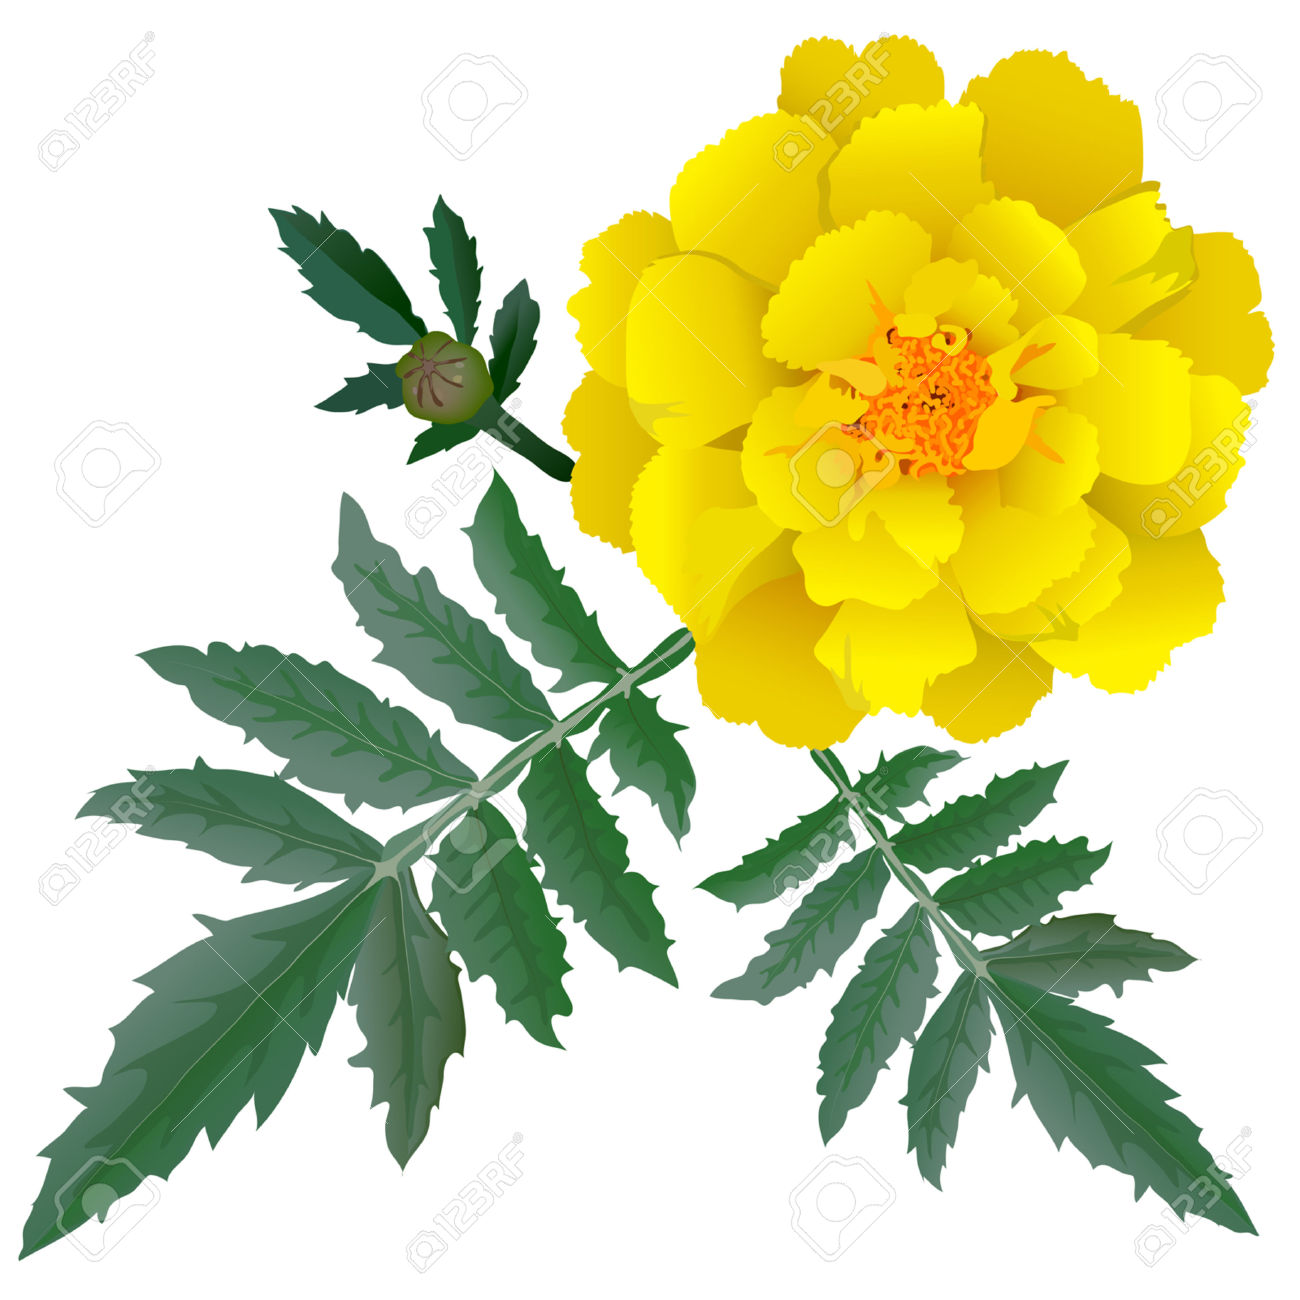 Yellow marigold clipart - Clipground